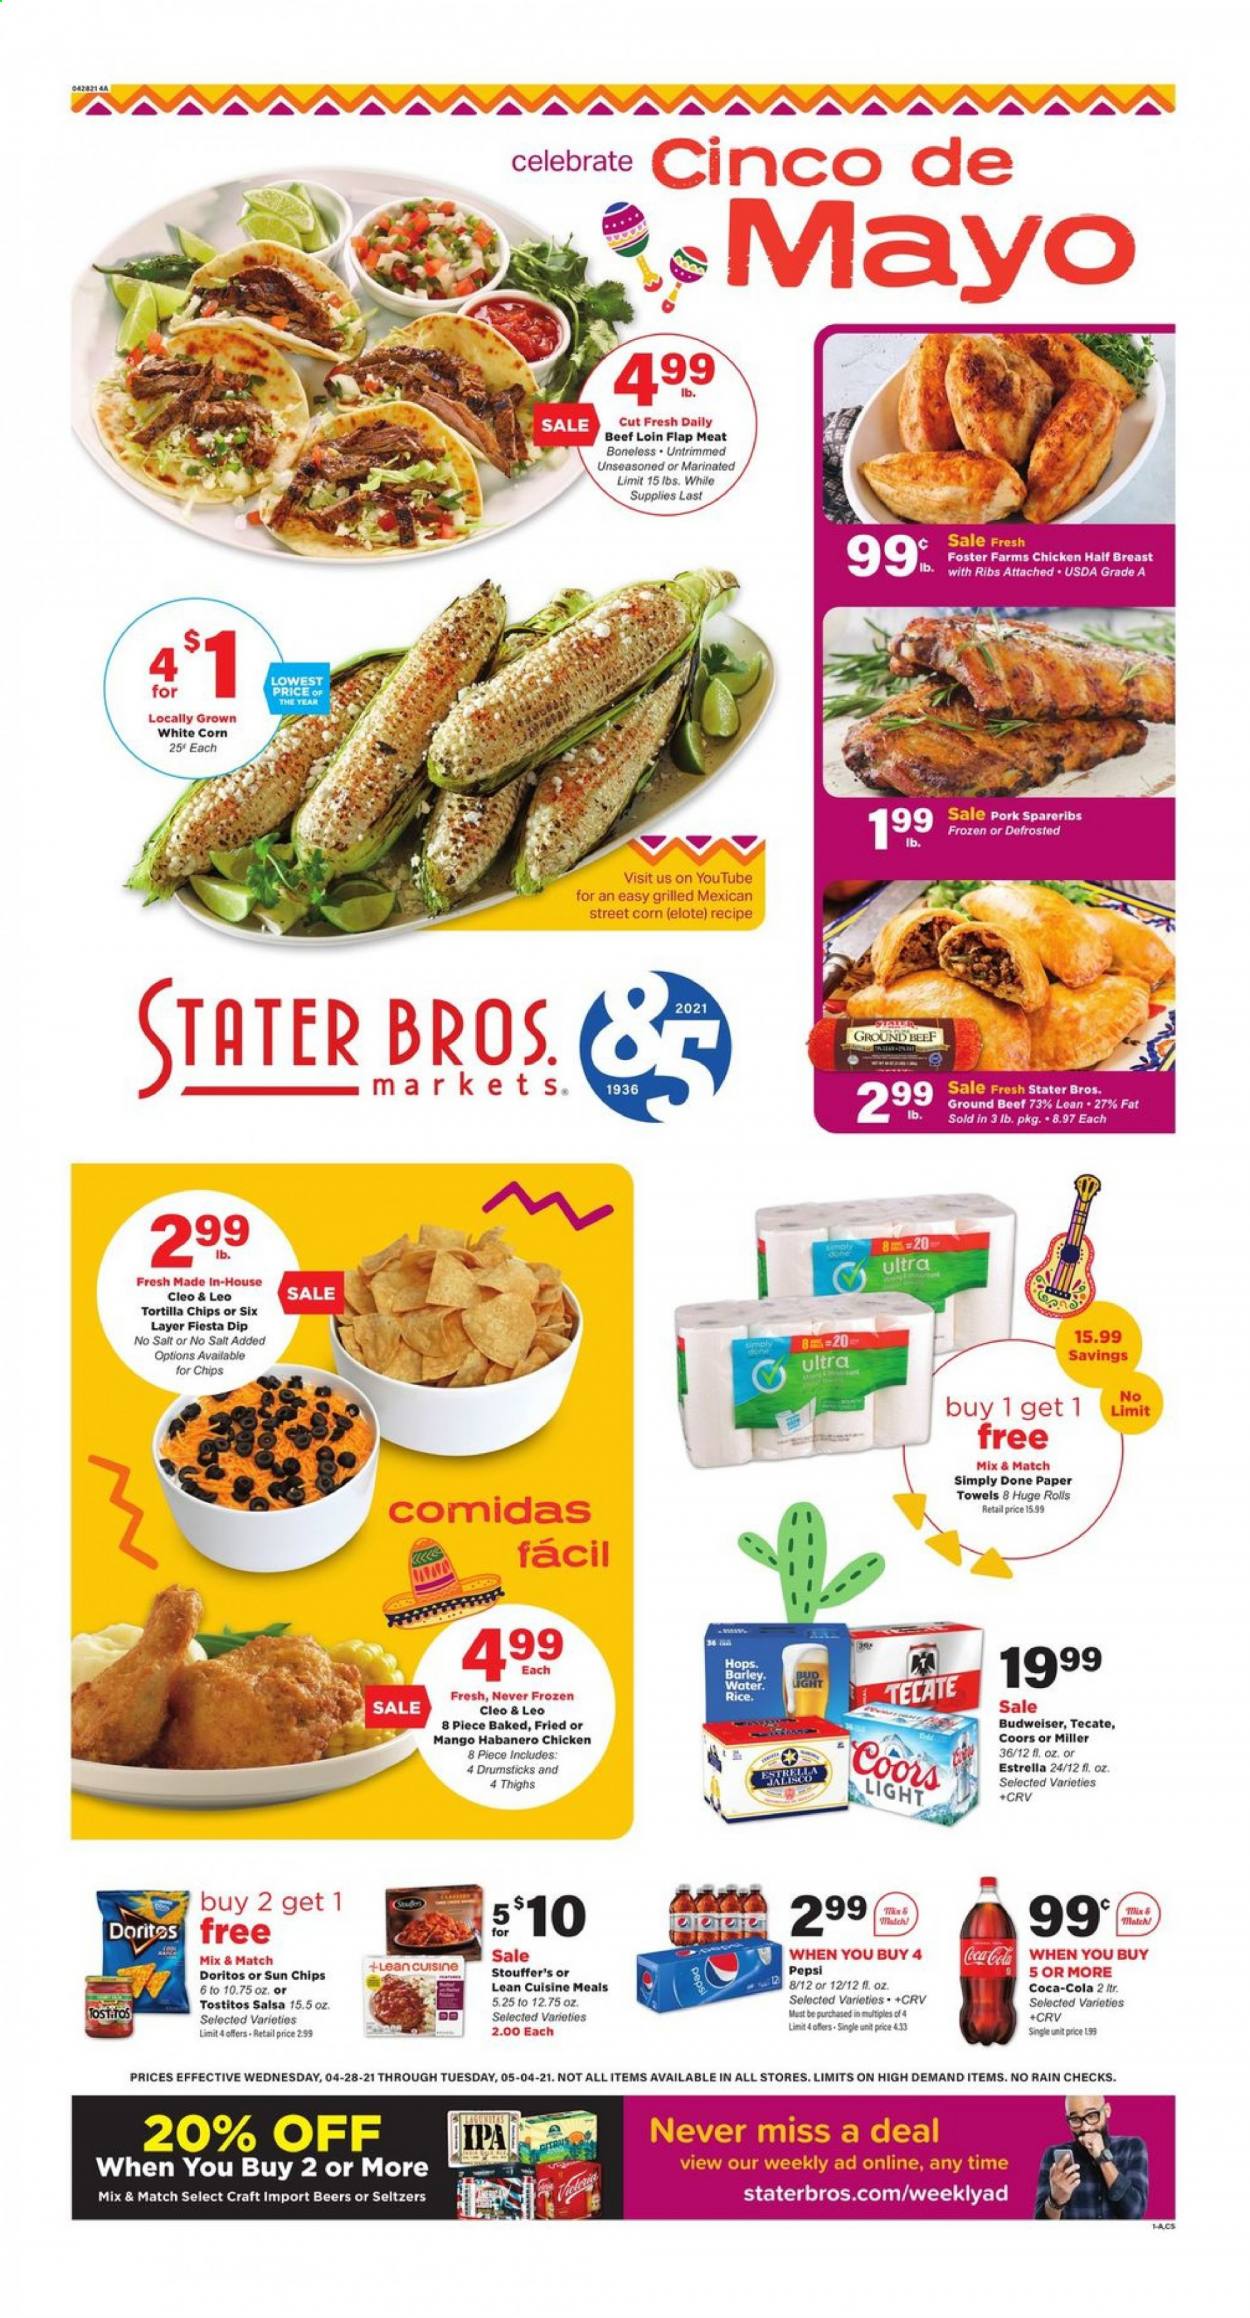 thumbnail - Stater Bros. Flyer - 04/28/2021 - 05/04/2021 - Sales products - Budweiser, Coors, corn, Lean Cuisine, habanero chicken, Stouffer's, Doritos, tortilla chips, Tostitos, salsa, Coca-Cola, Pepsi, beer, Miller, IPA, beef meat, ground beef, pork spare ribs, kitchen towels, paper towels. Page 1.